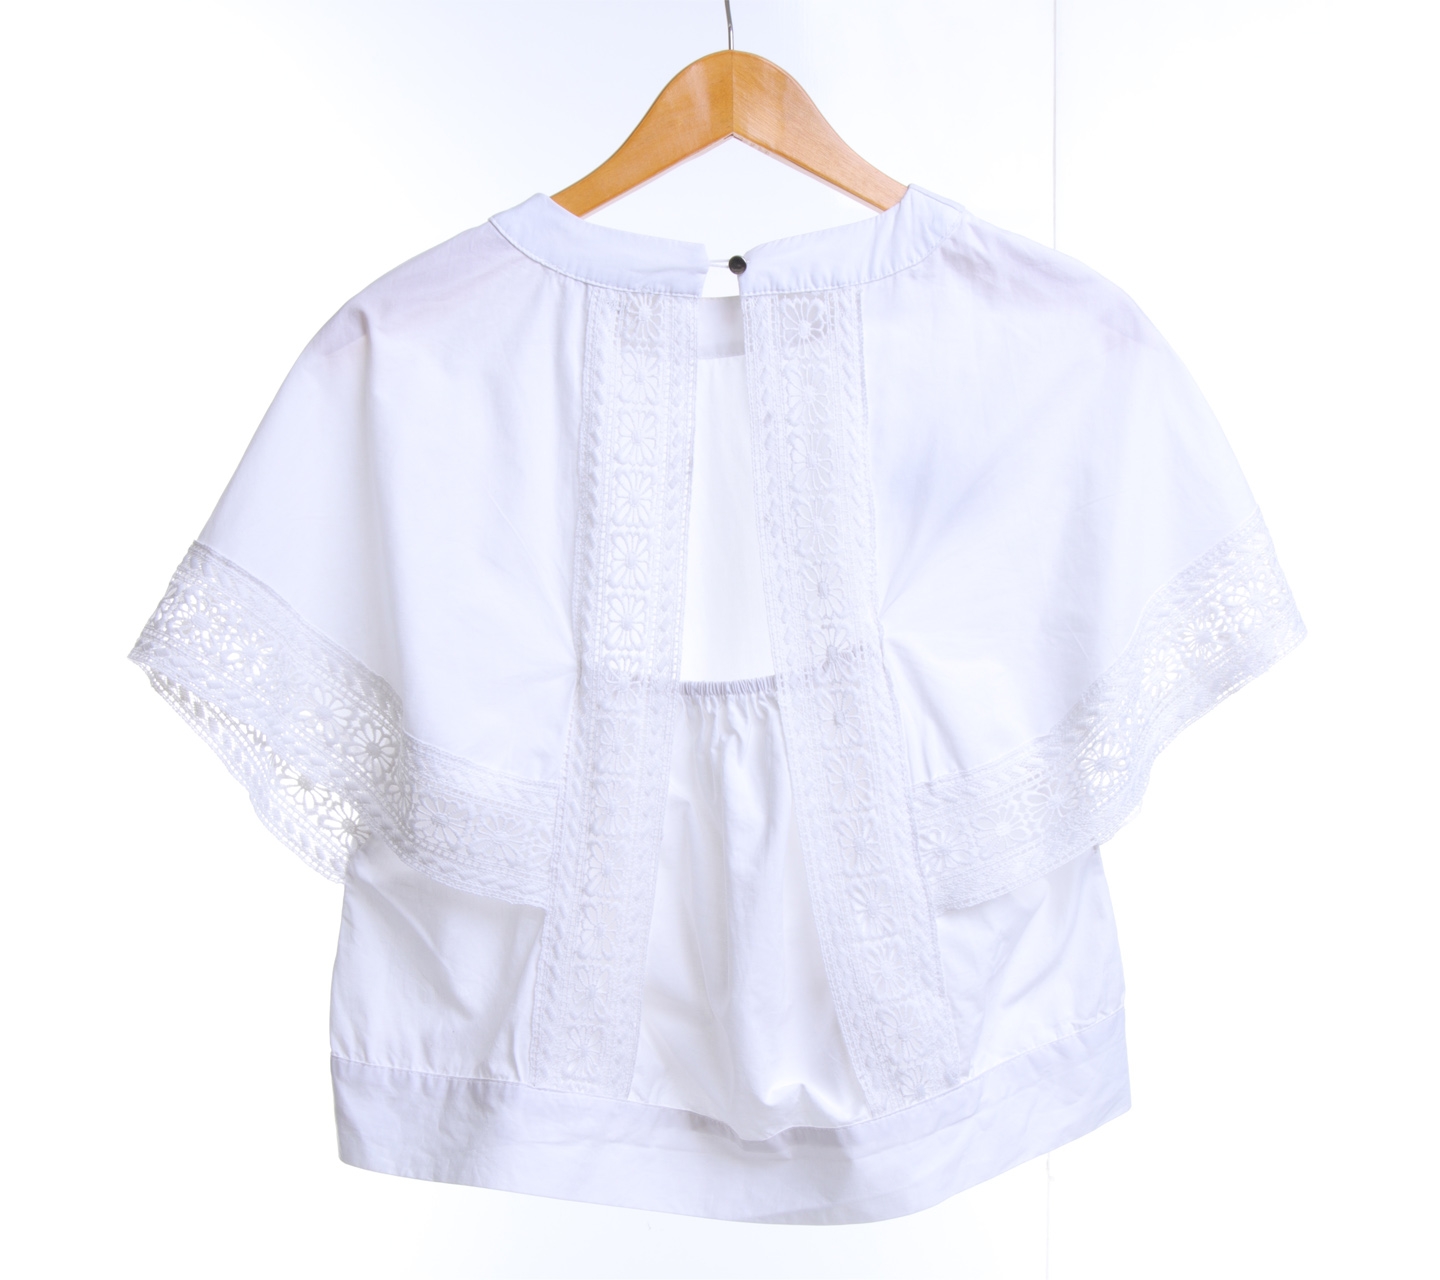 This is April White Crop Top Back Blouse